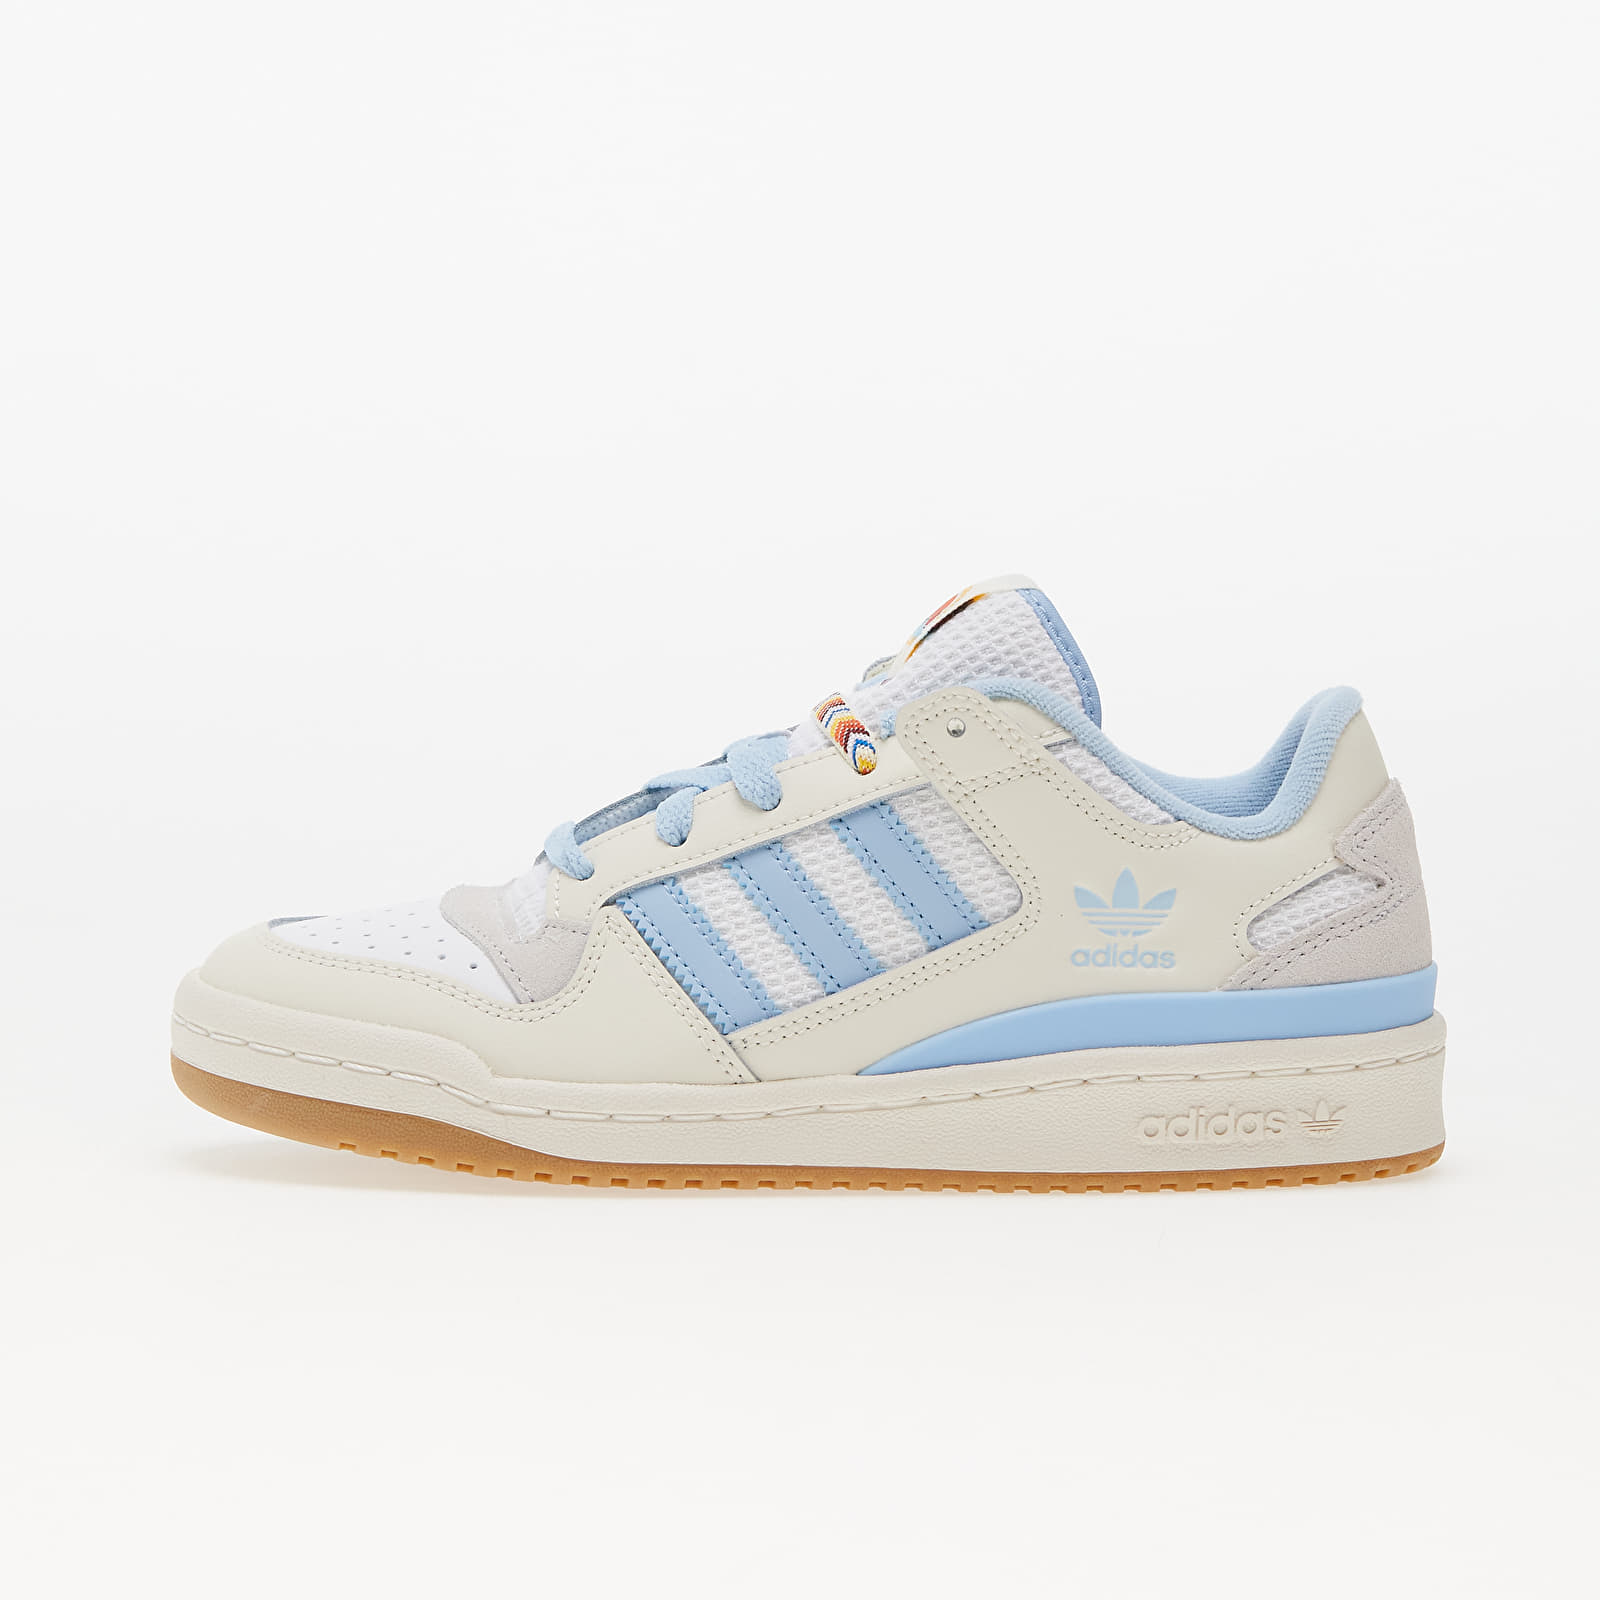 Women's shoes adidas Forum Low Cl W Core White/ Clear Sky/ Ftw White